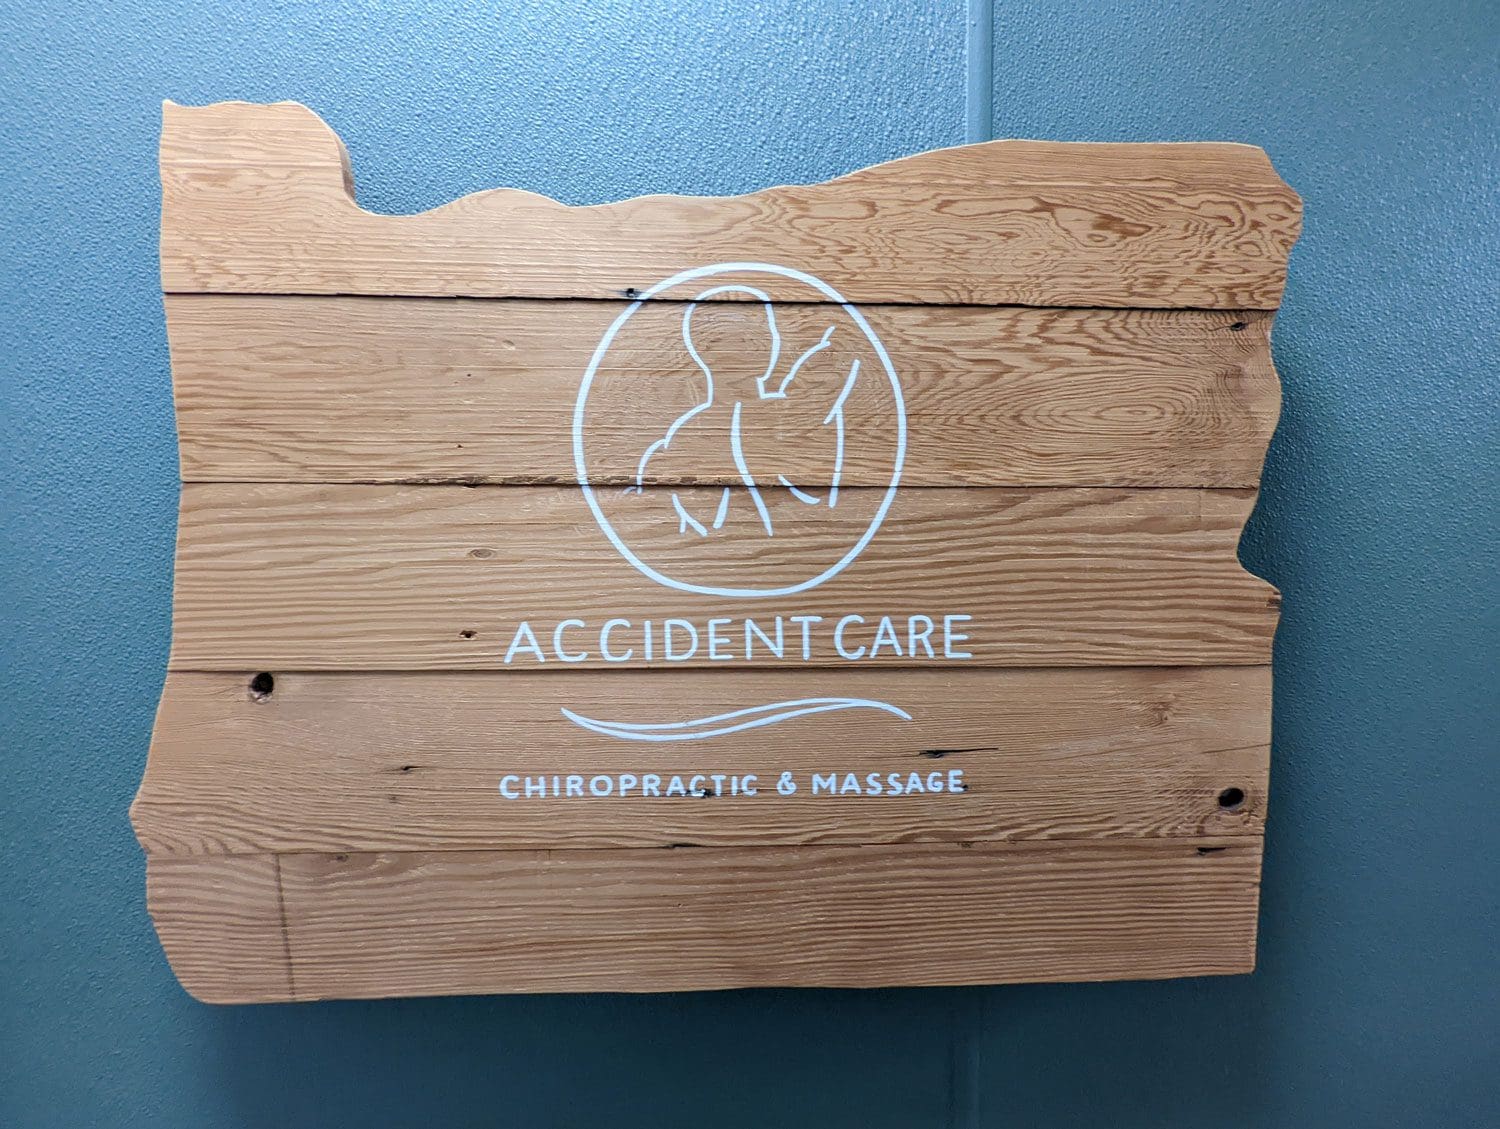 Accident Care Chiropractic & Massage wooden sign.